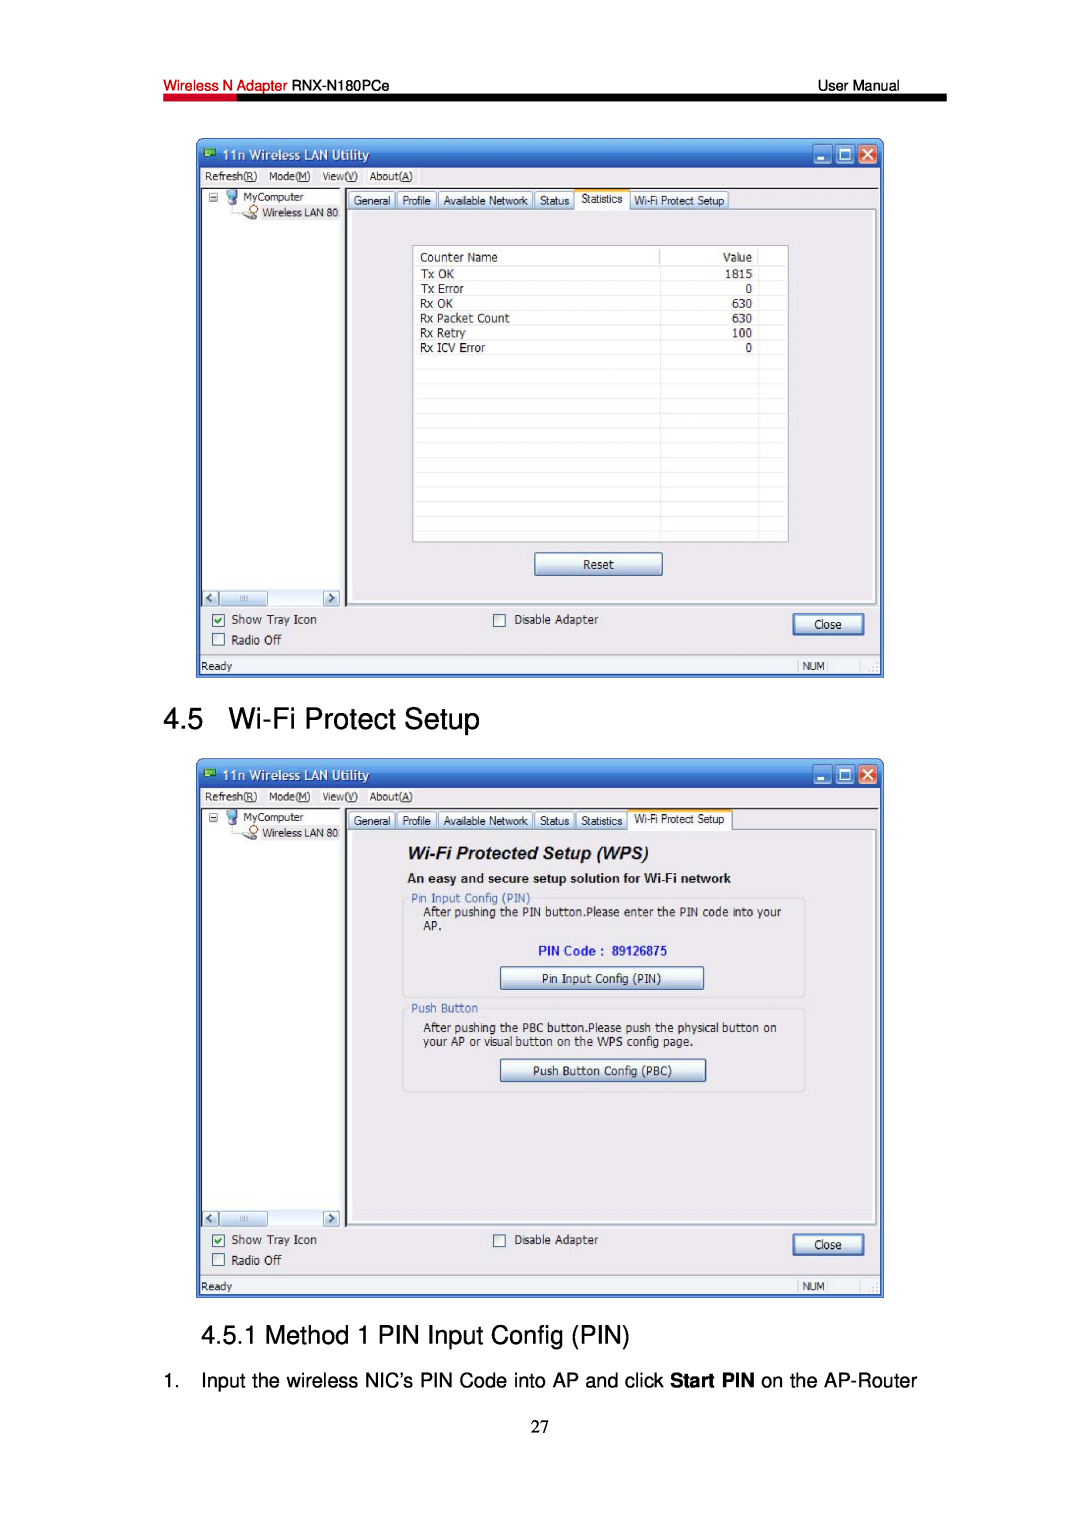 Rosewill RNX-N180PCE user manual Wi-Fi Protect Setup, Method 1 PIN Input Config PIN, Wireless N Adapter RNX-N180PCe 